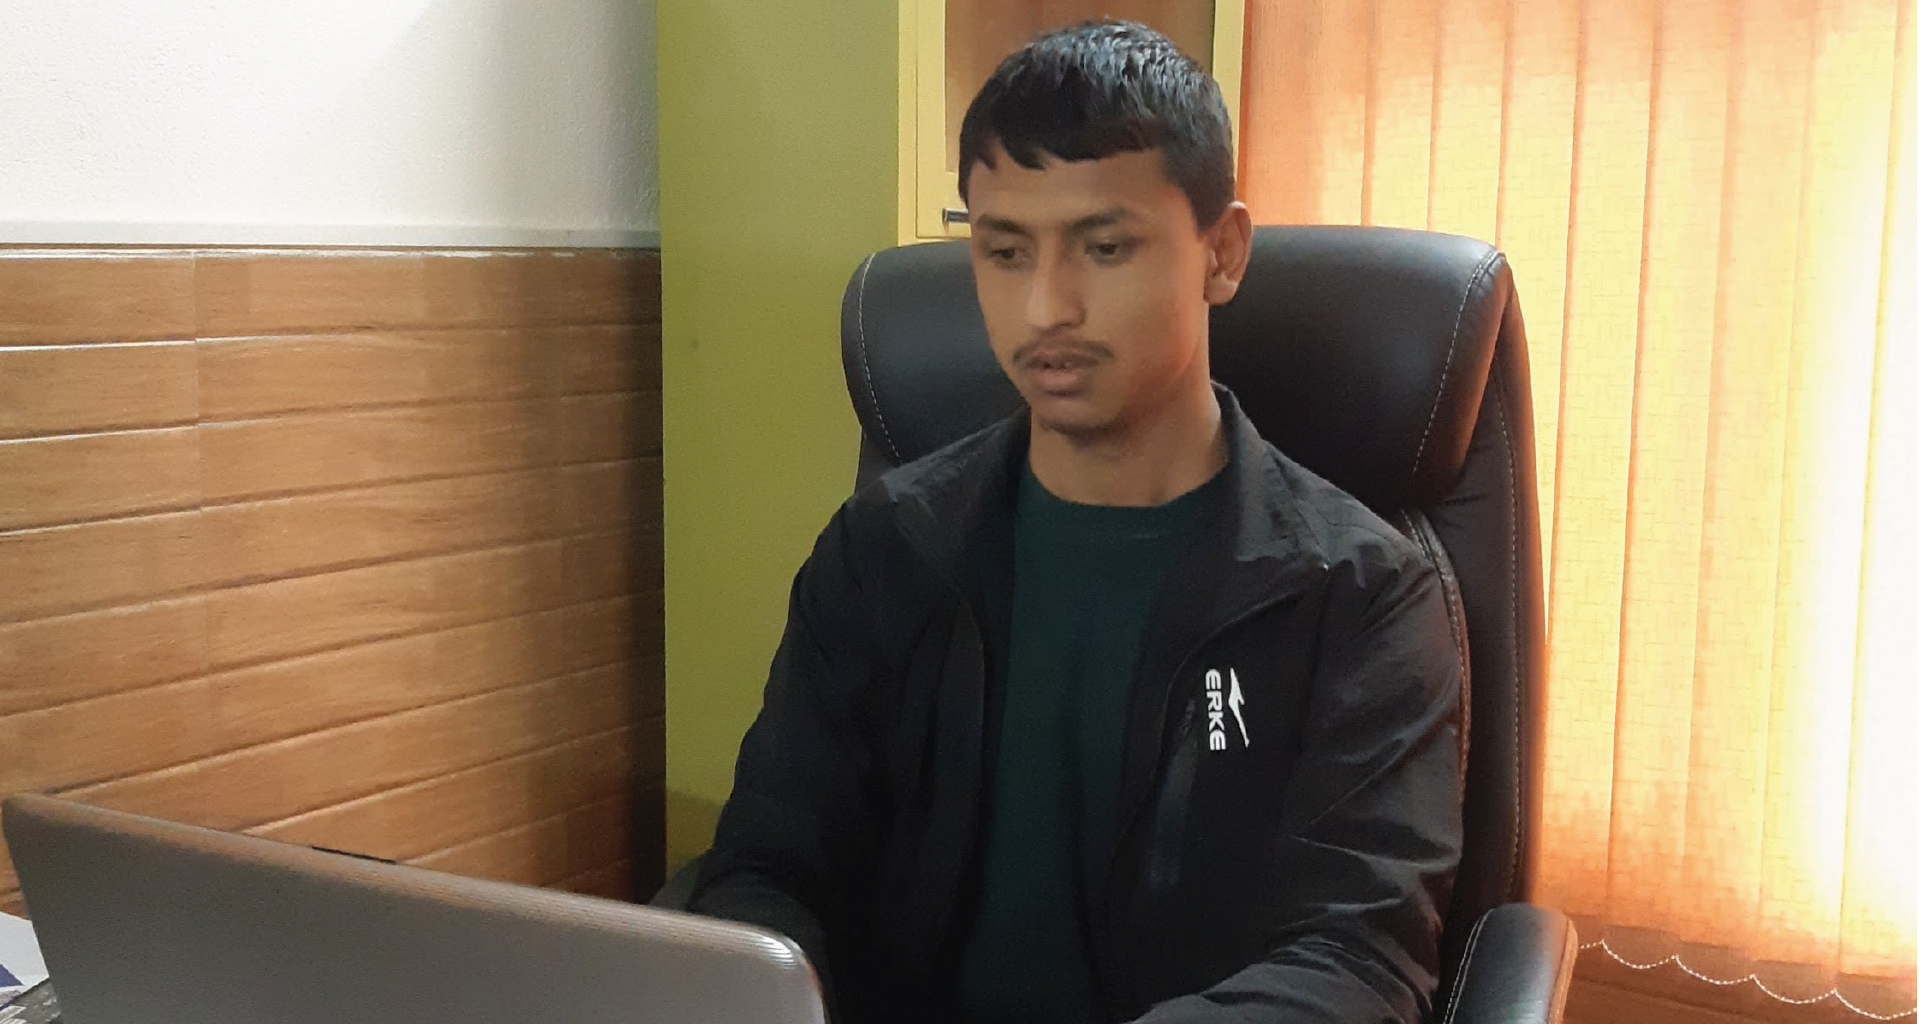 A person wearing green t-shirt and black jacket working in his laptop.